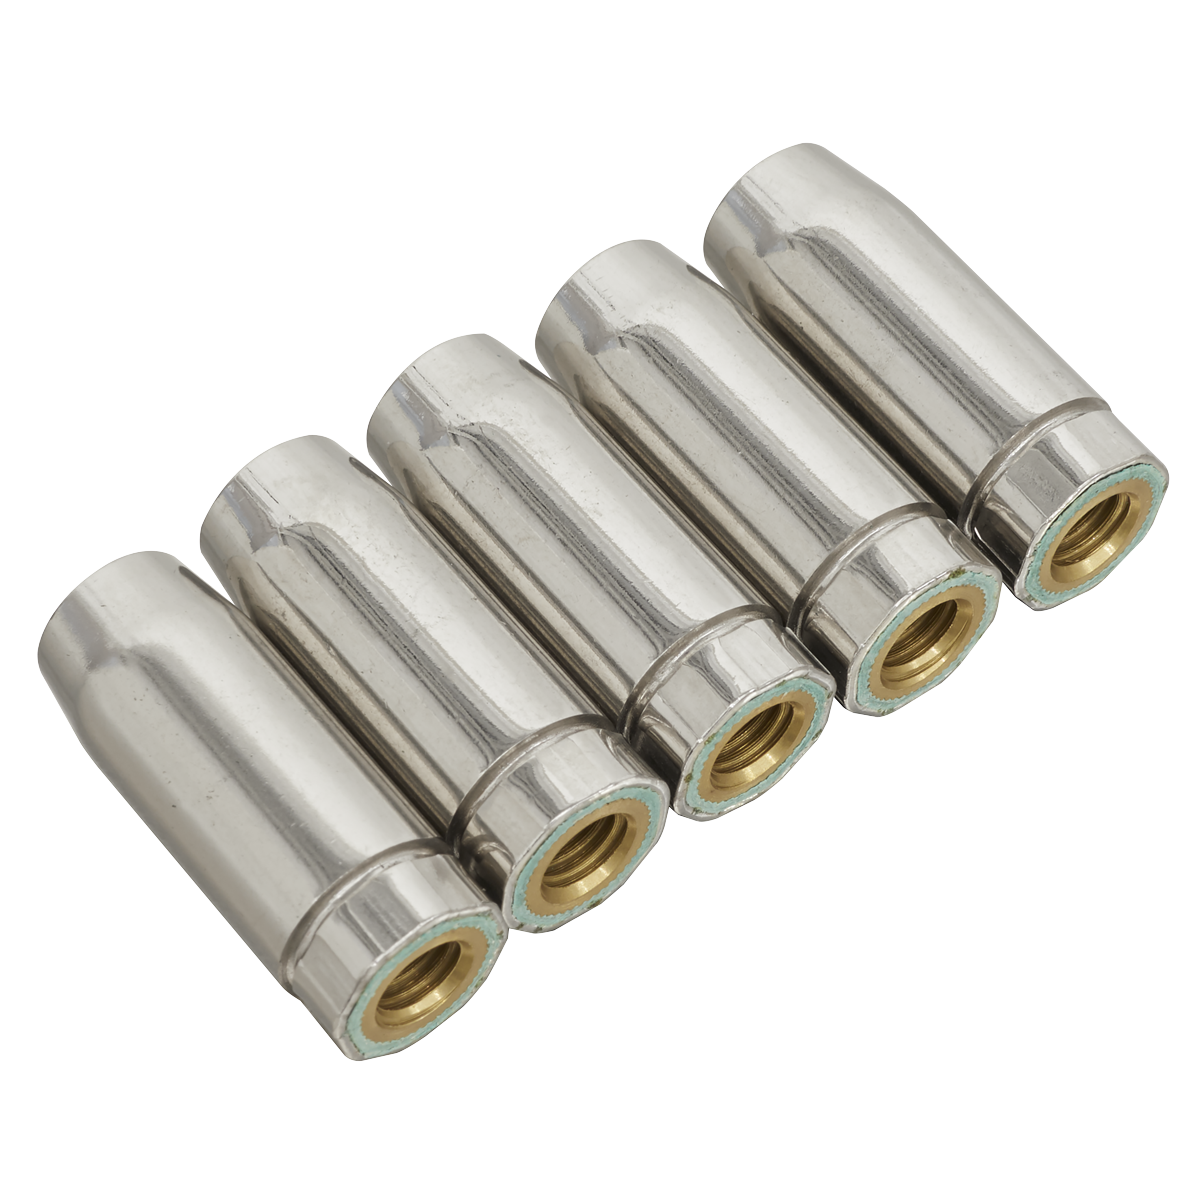 Conical Nozzle MB14 Pack of 5